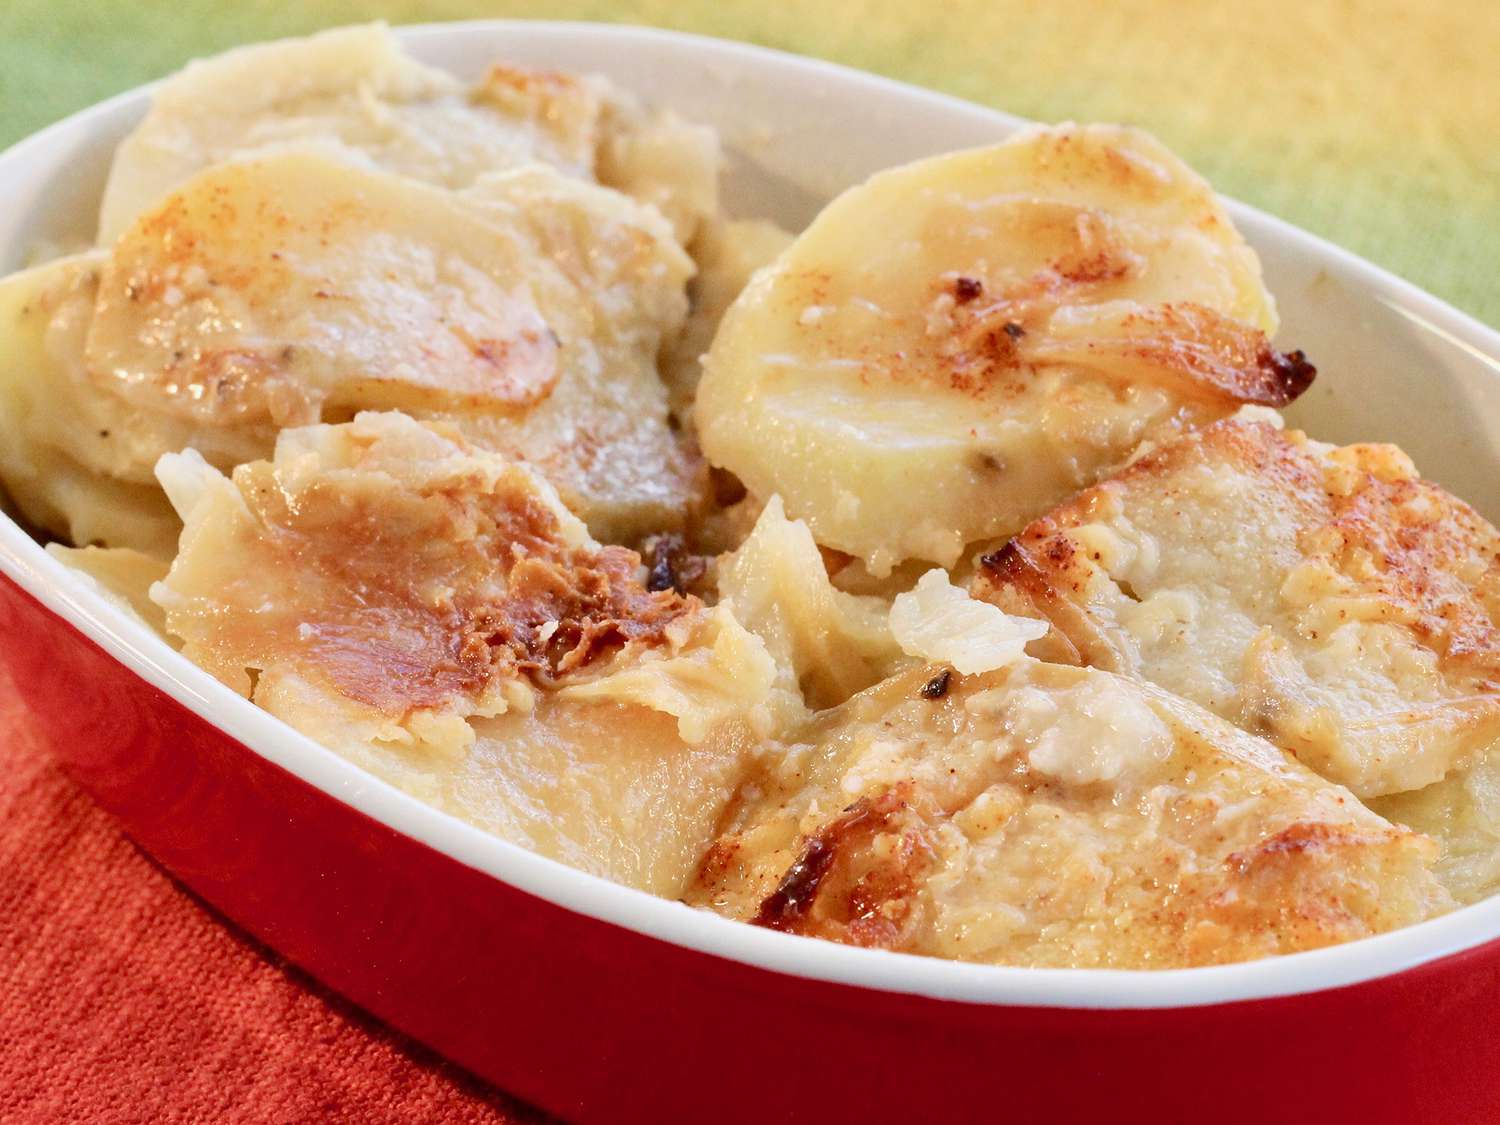 Close up view of Creamy and Crispy Scalloped Potatoes in a red and white baking dish